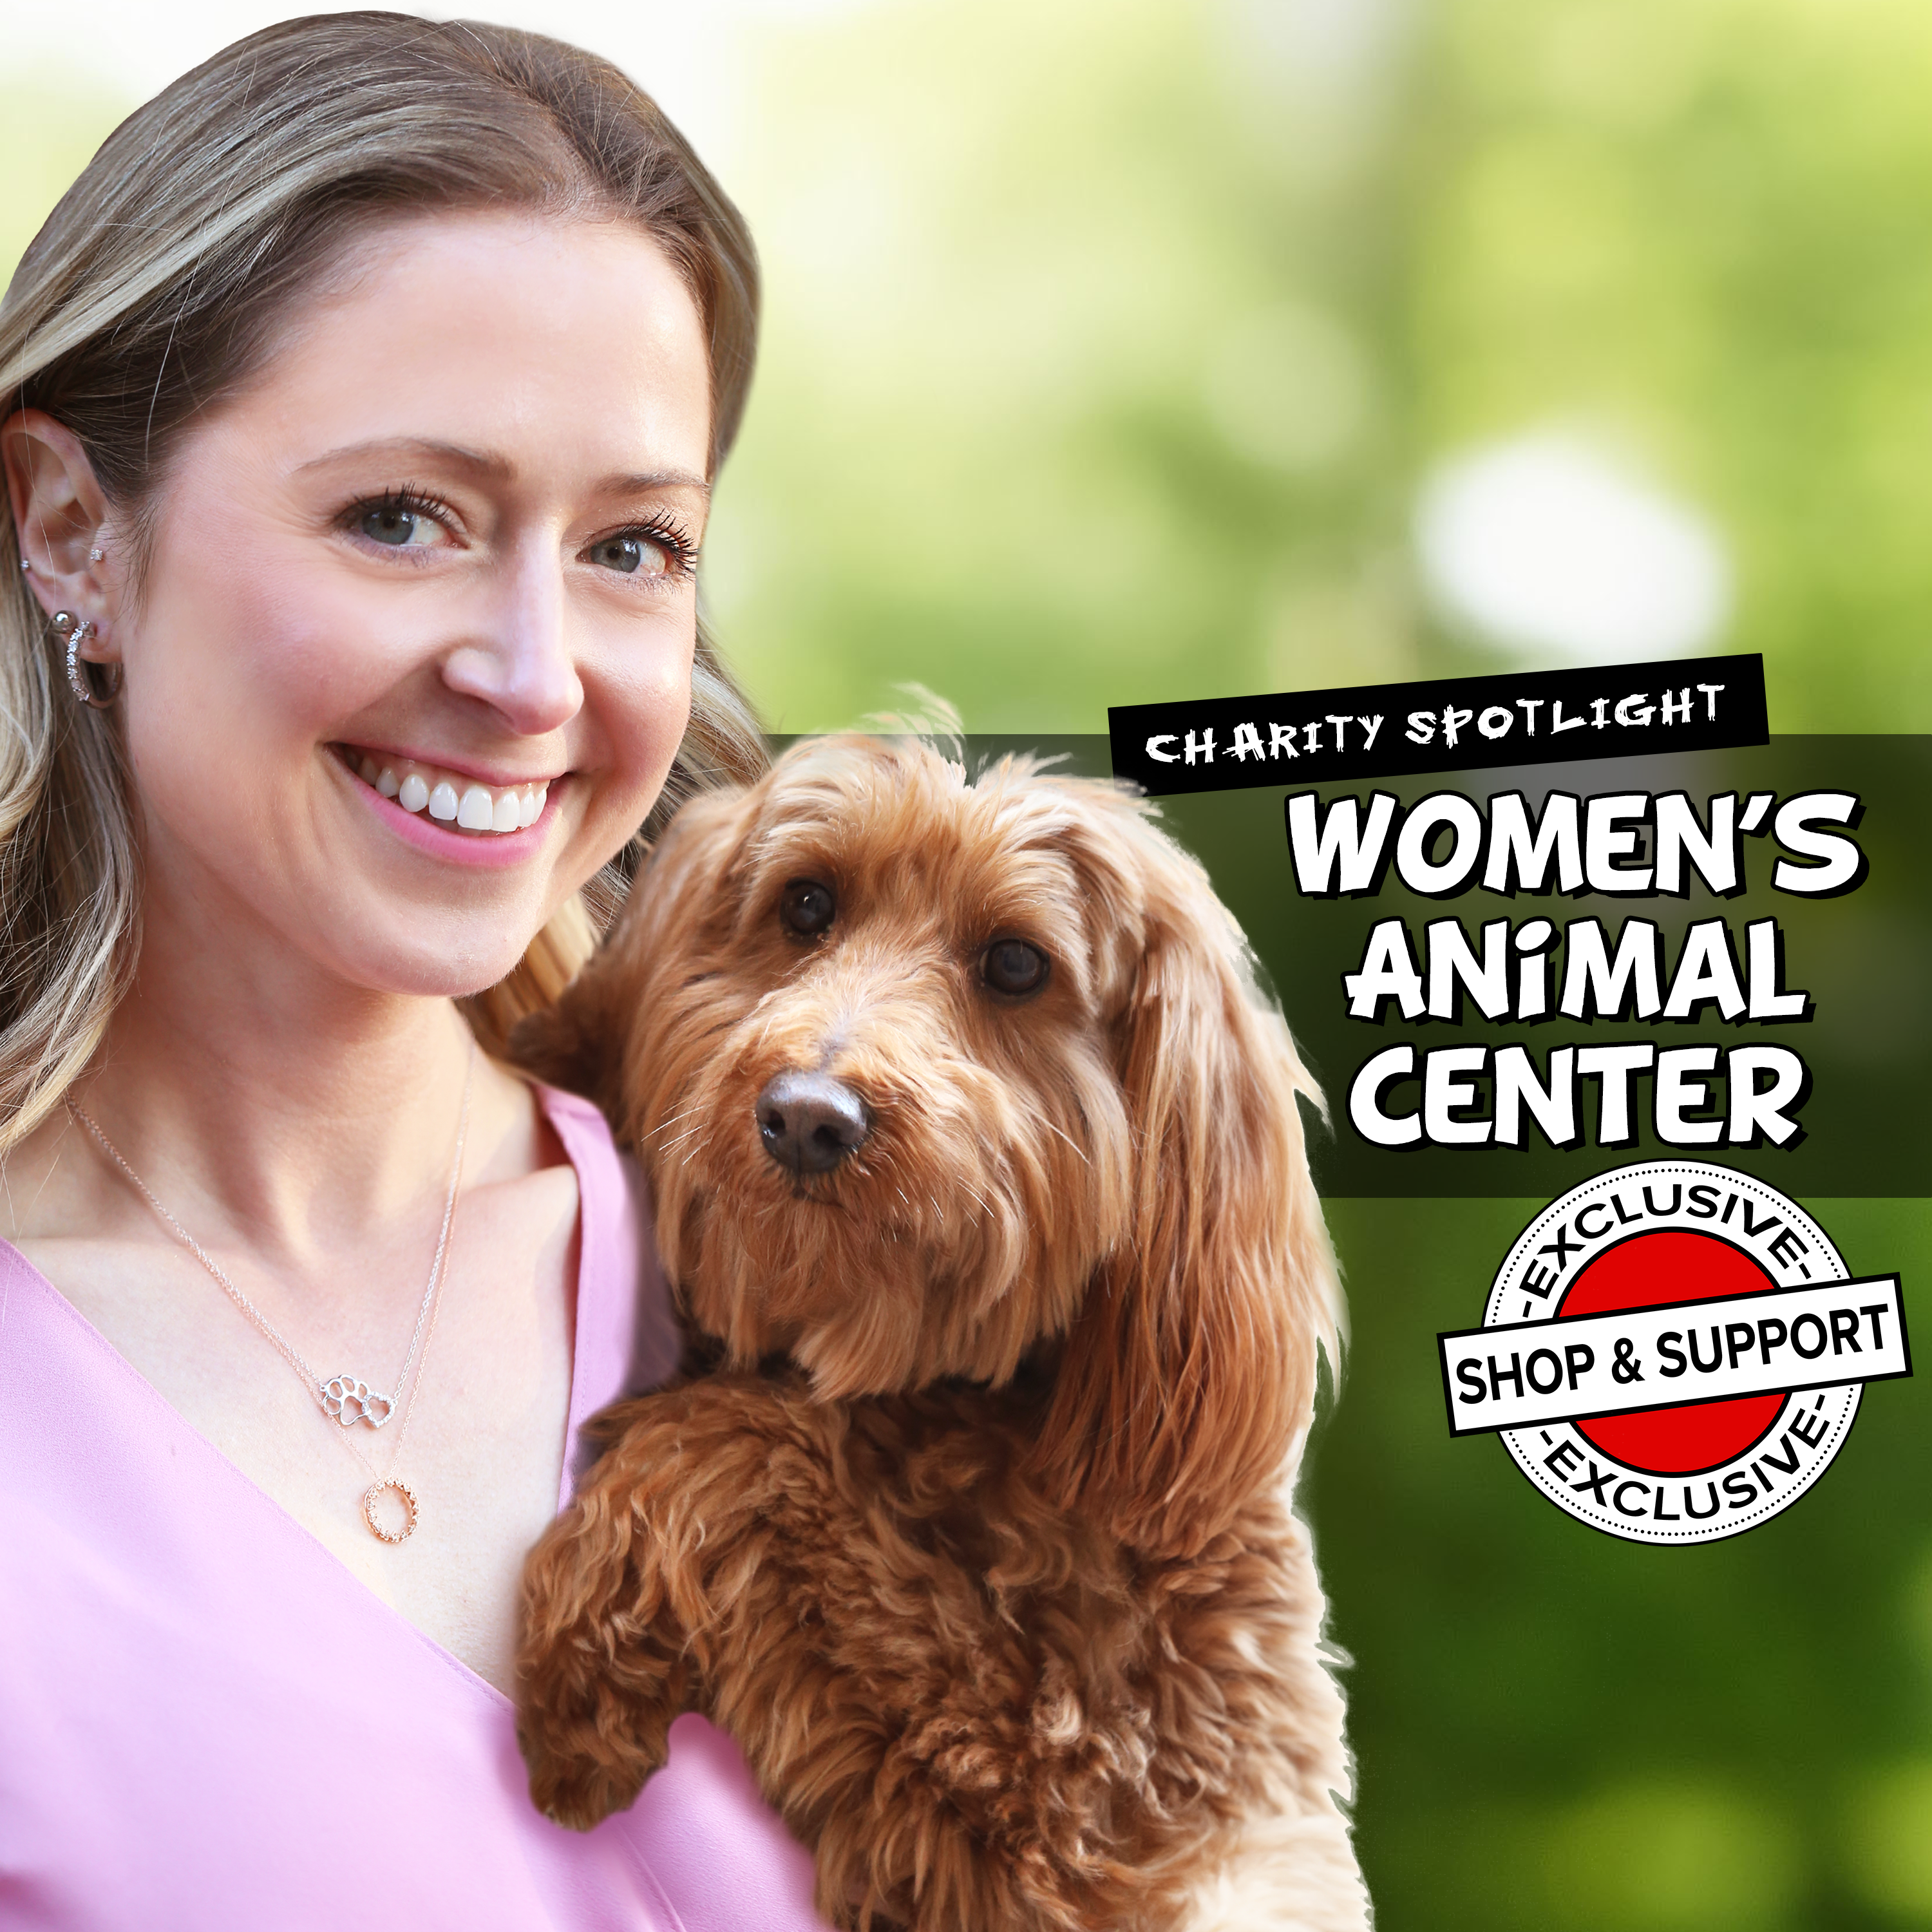 Why We Support Women's Animal Center